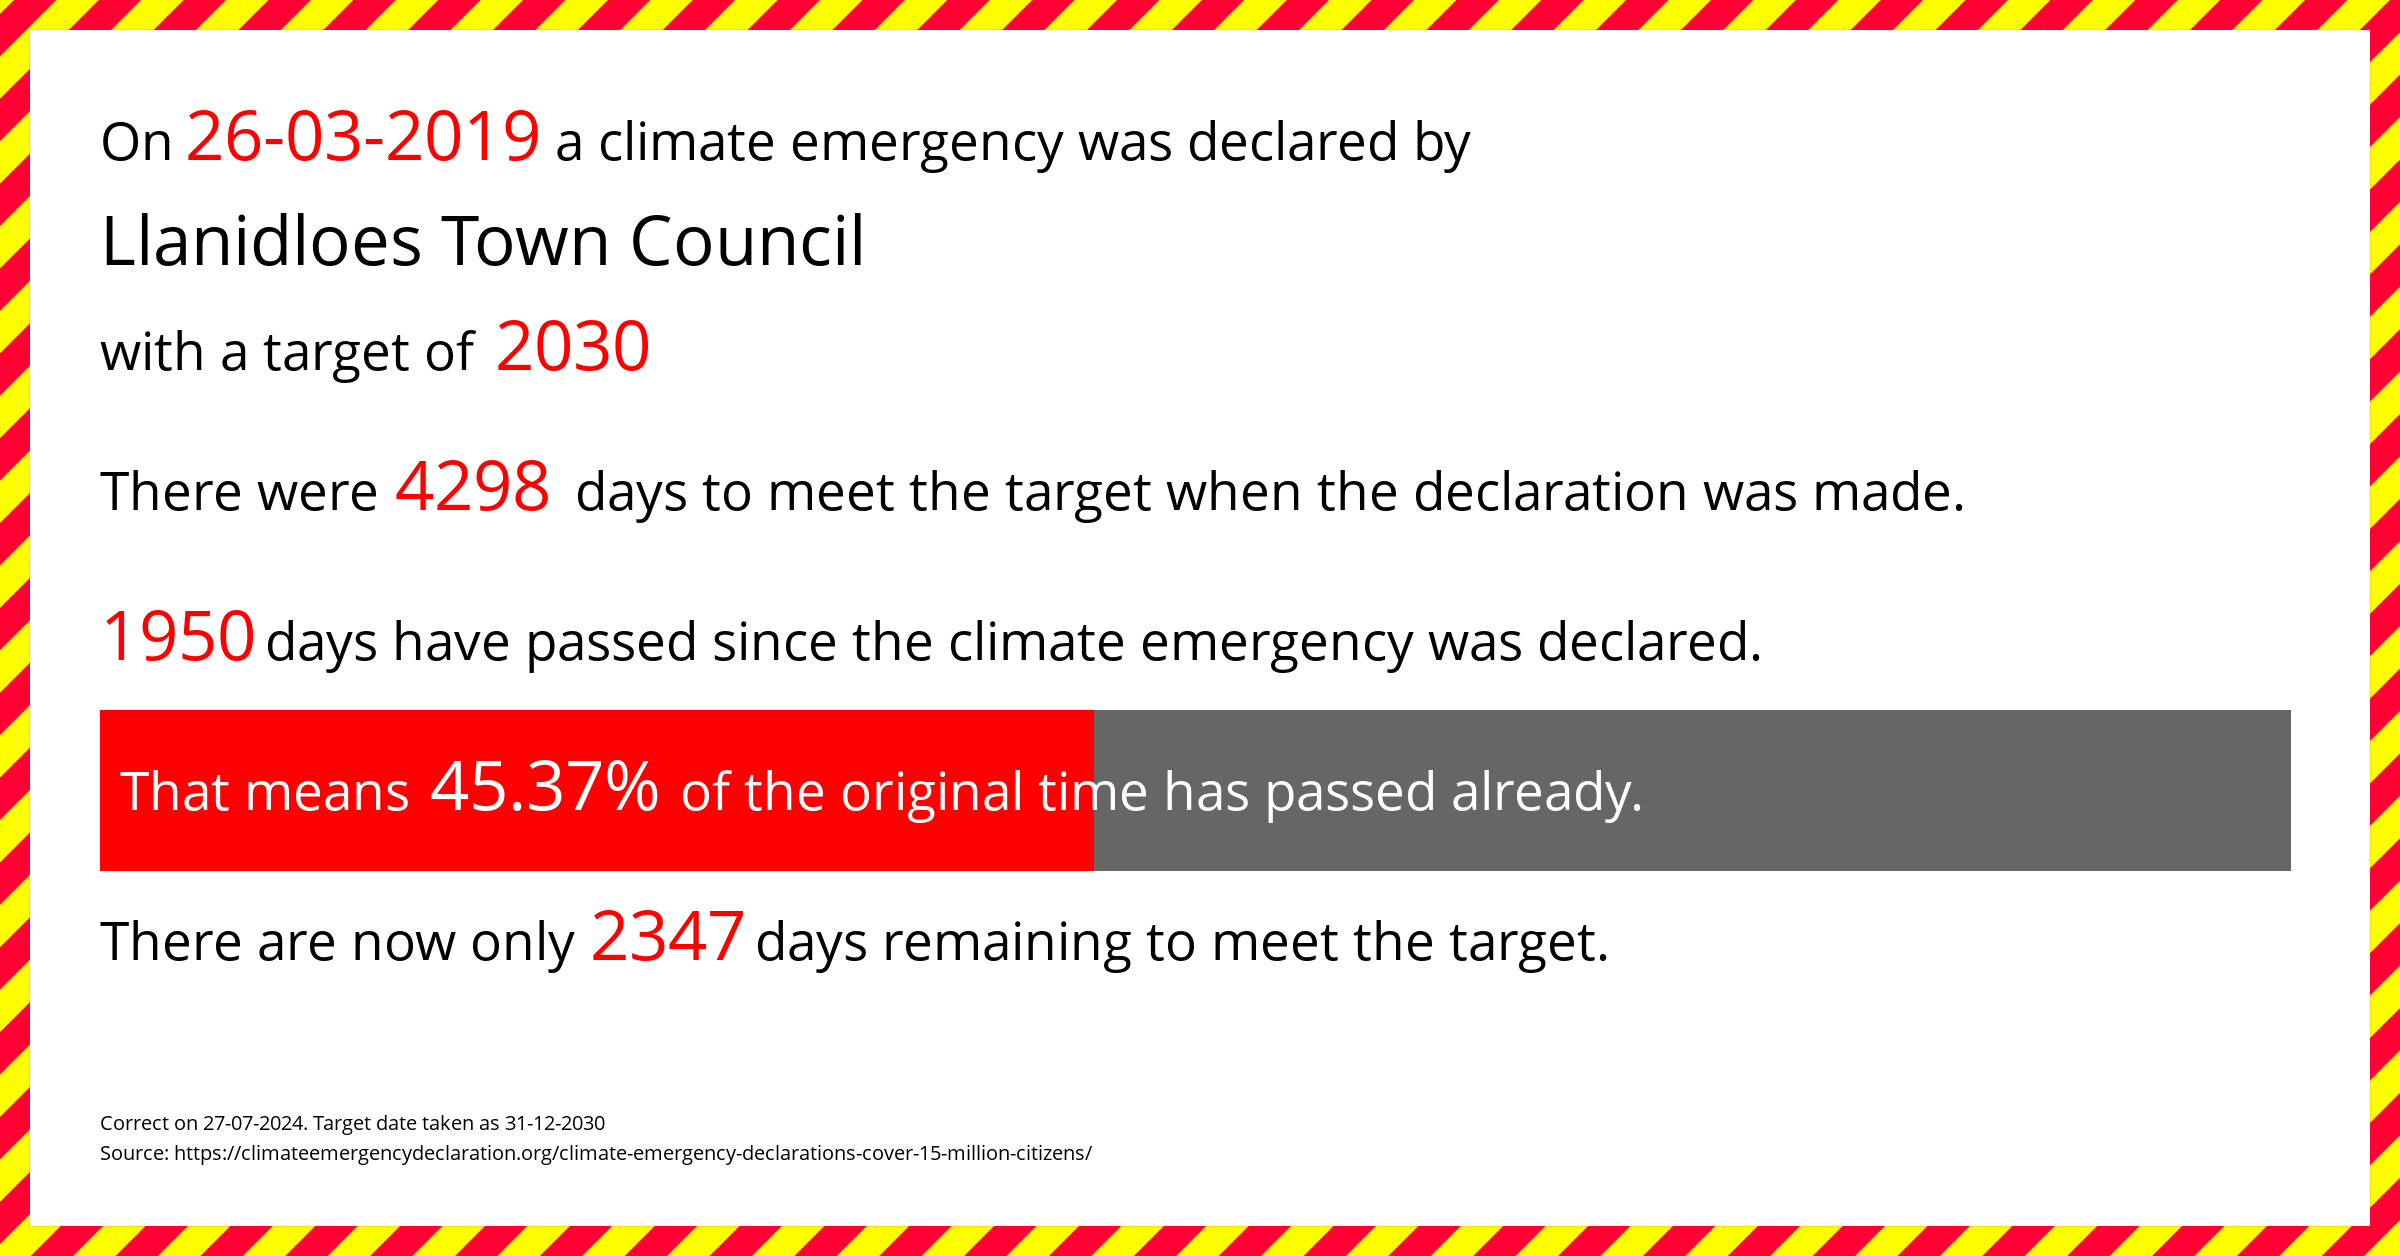 Llanidloes Town Council declared a Climate emergency on Tuesday 26th March 2019, with a target of 2030.